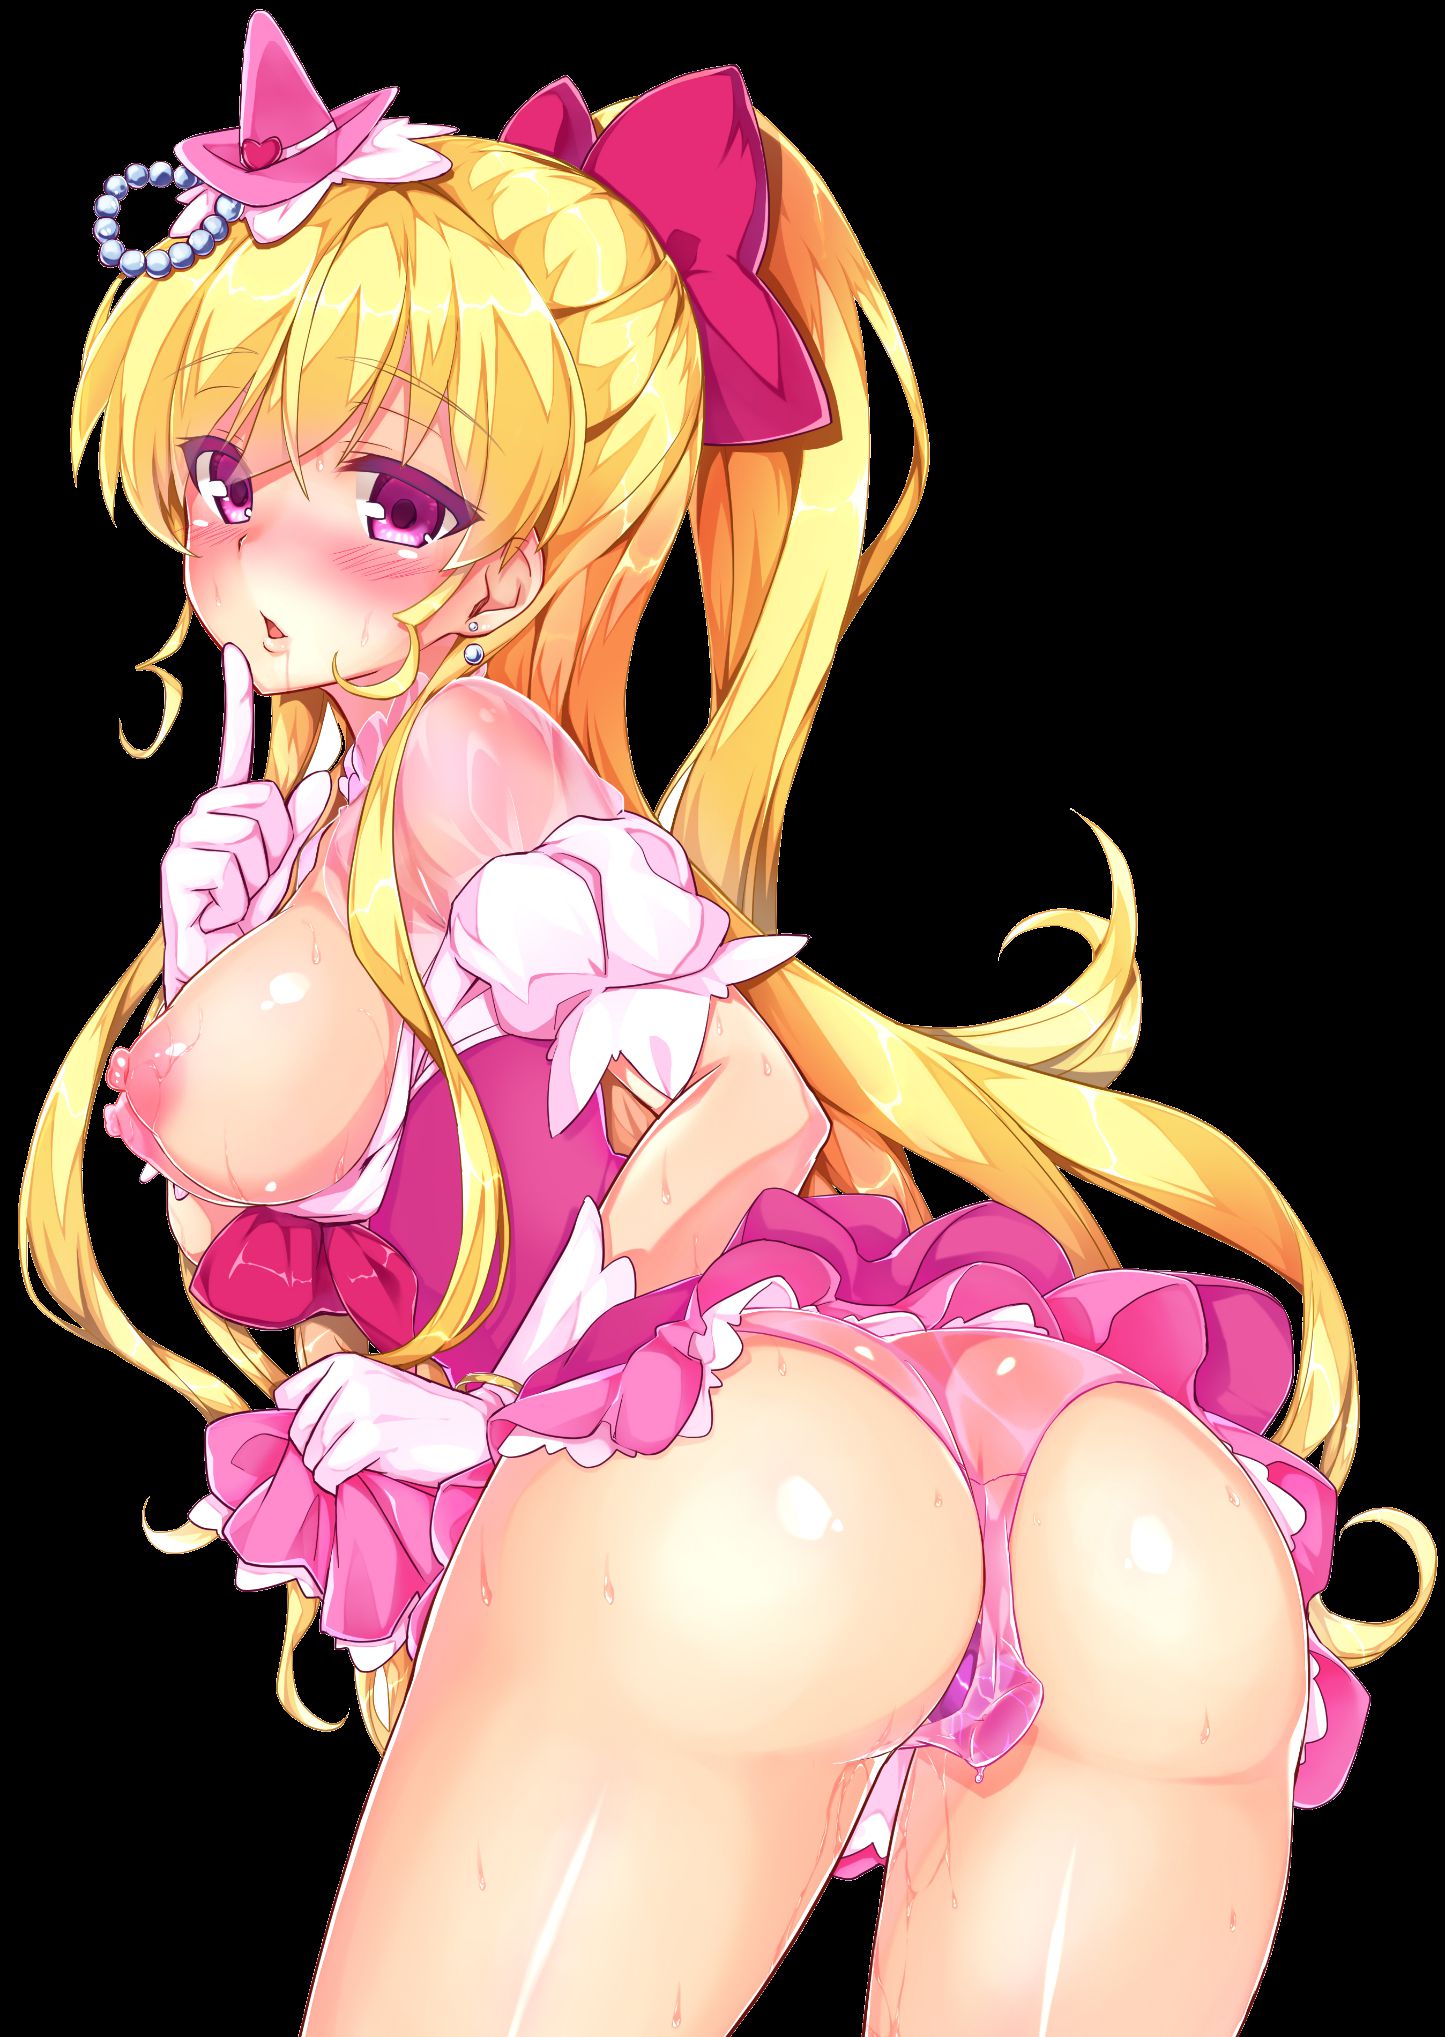 【Erocora Character Material】PNG background transparent erotic image such as anime characters Part 374 33